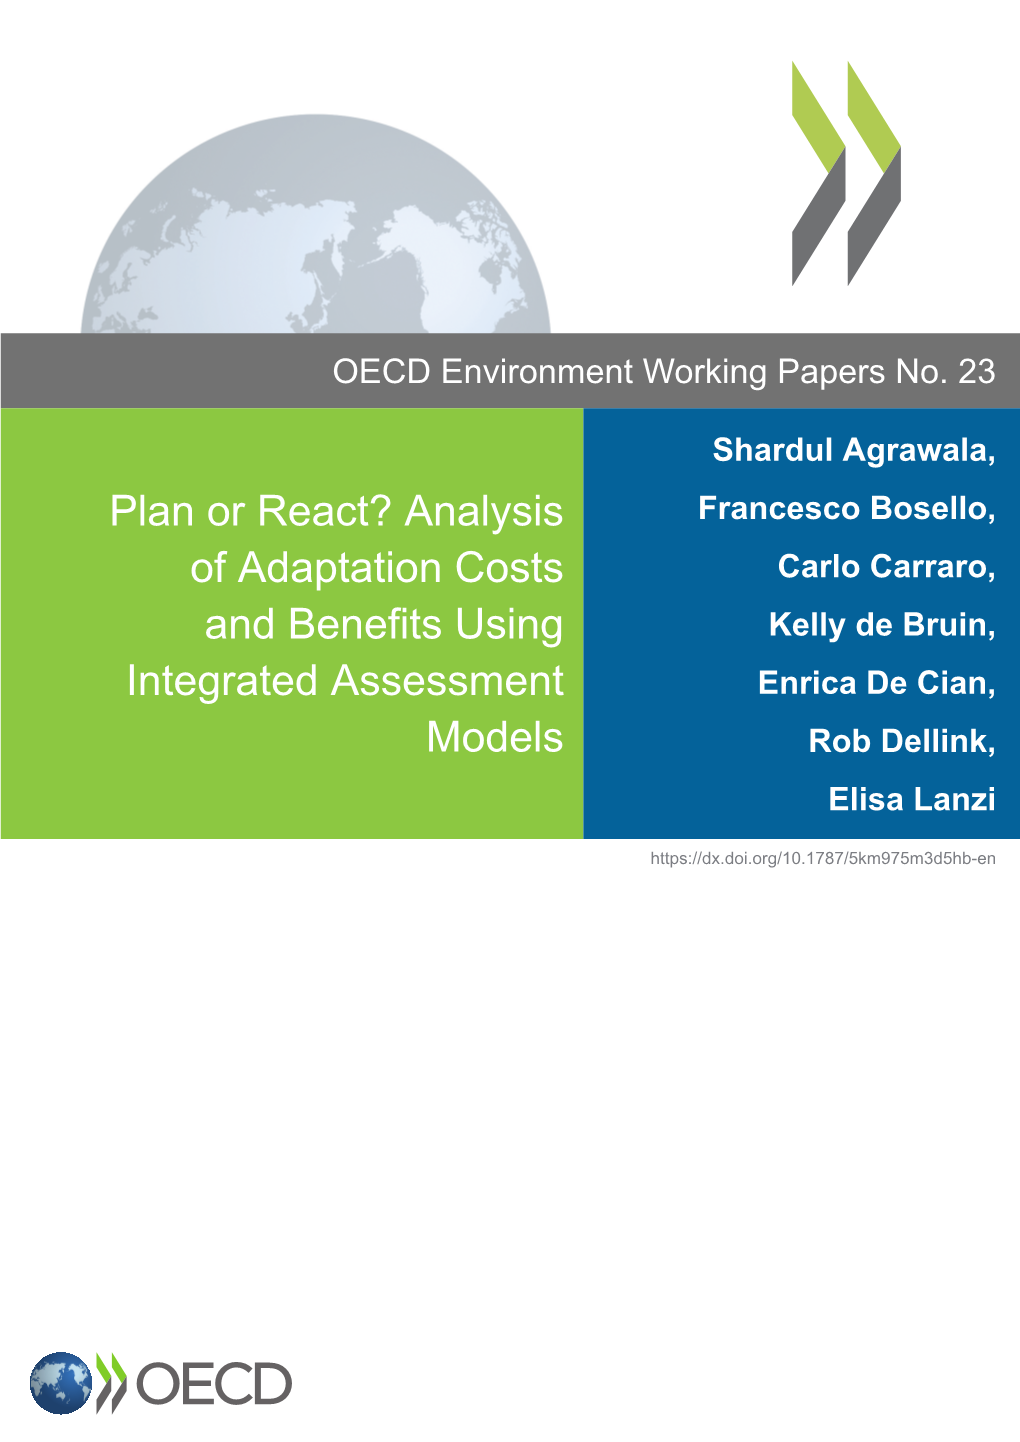 Plan Or React? Analysis of Adaptation Costs and Benefits Using Integrated Assessment Models